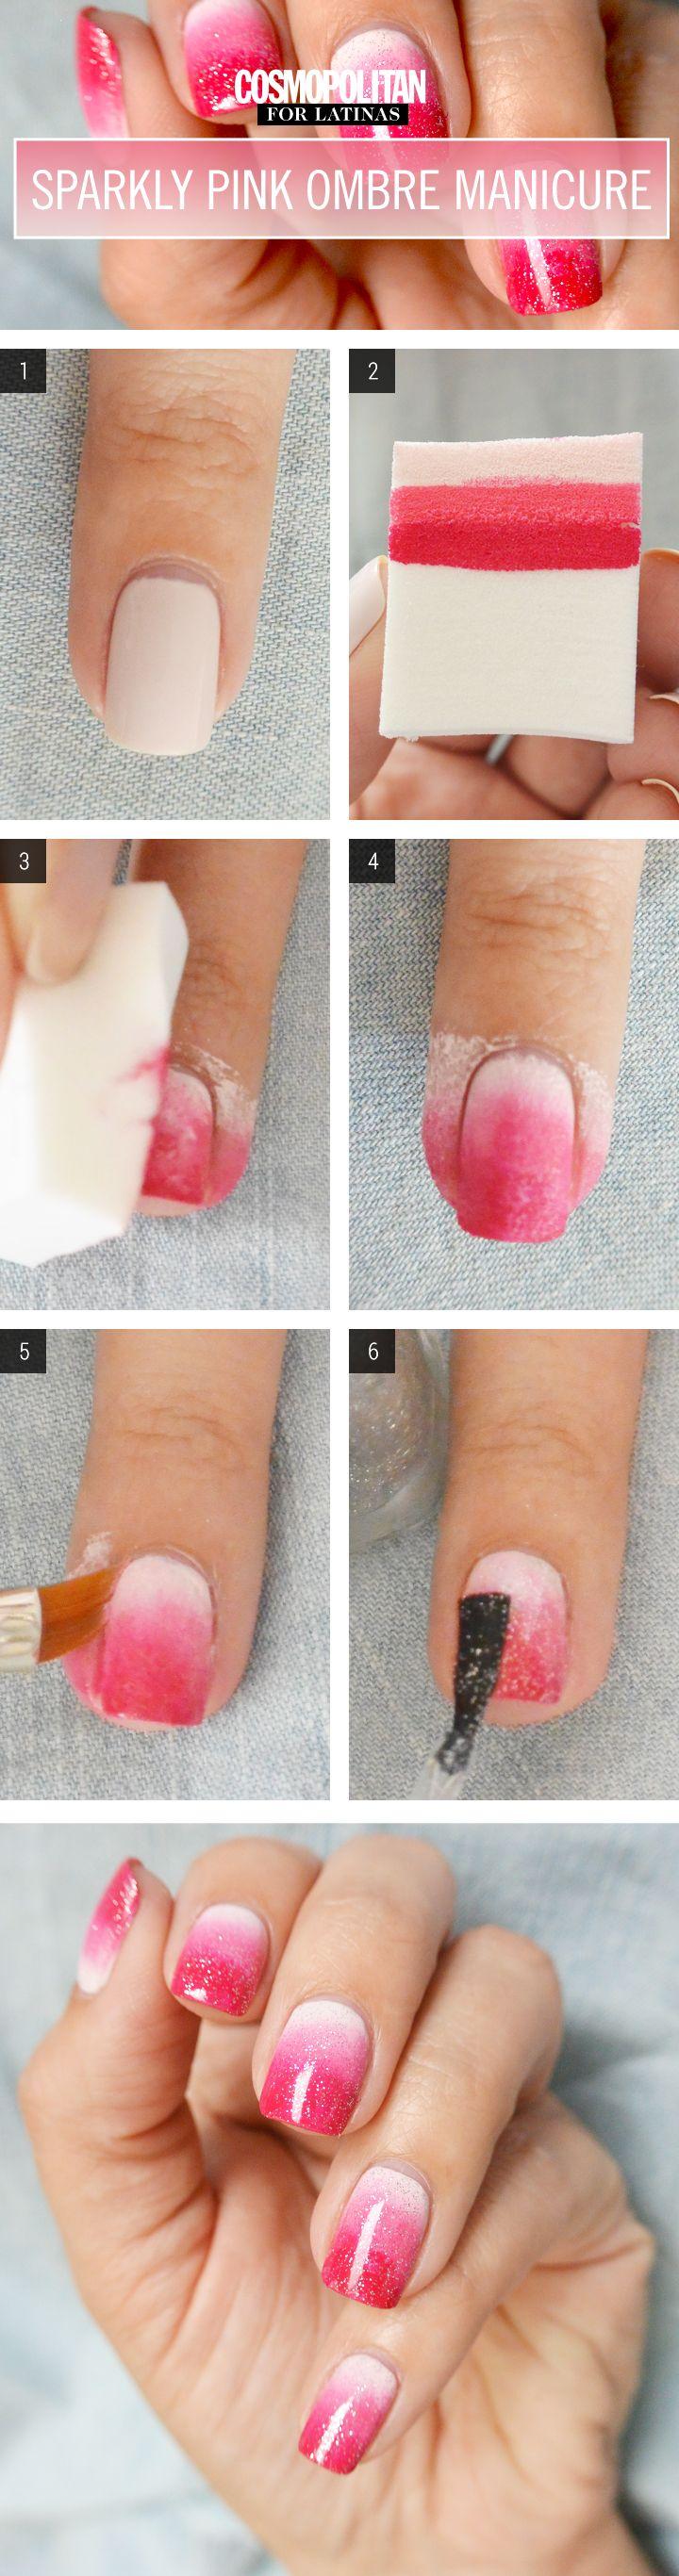 Свадьба - Nail Art How-To: Sparkly Pink Ombre Manicure